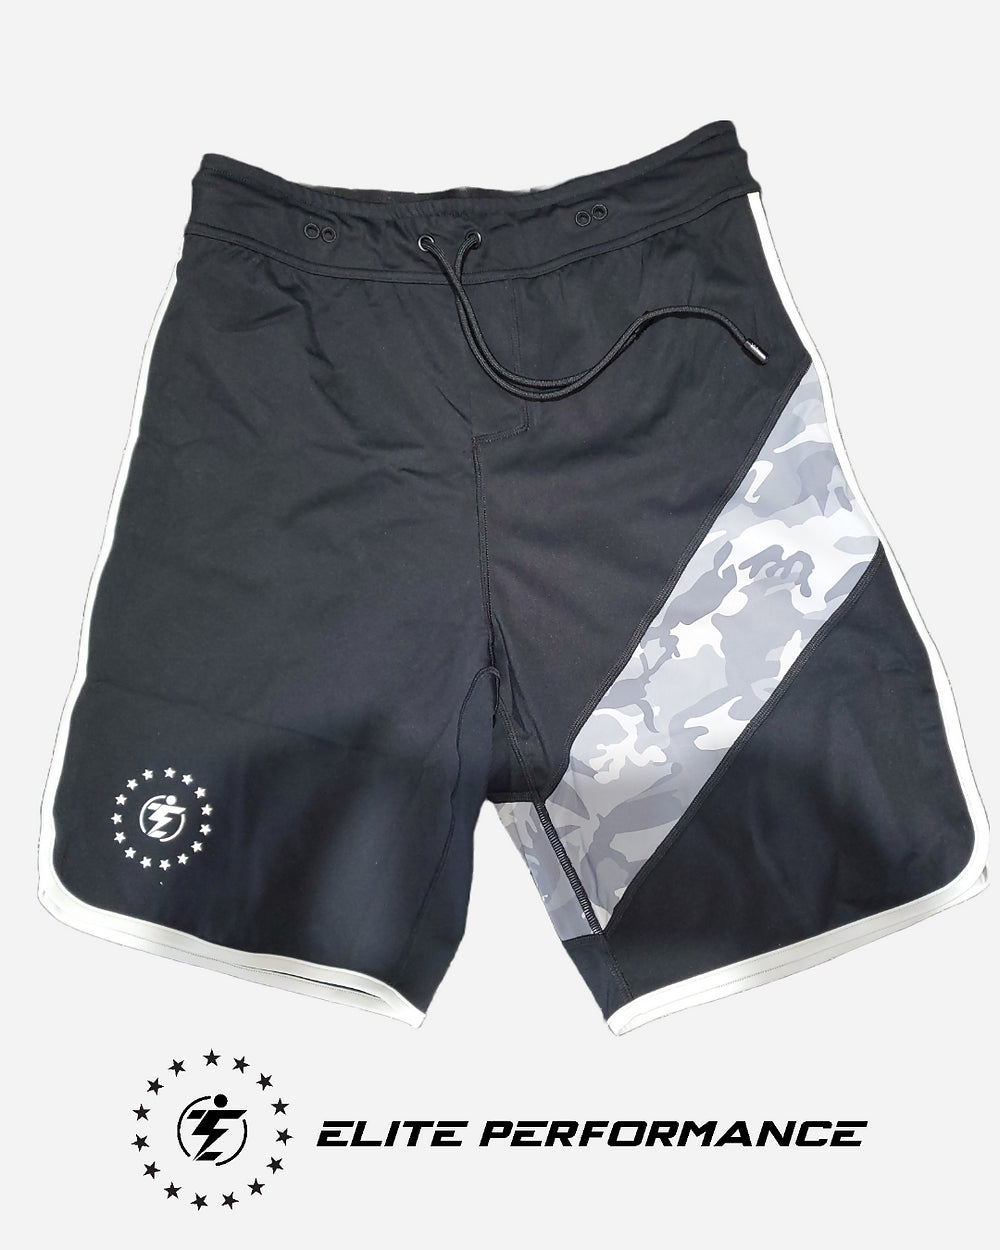 PHYSIQUE PERFORMANCE SHORTS